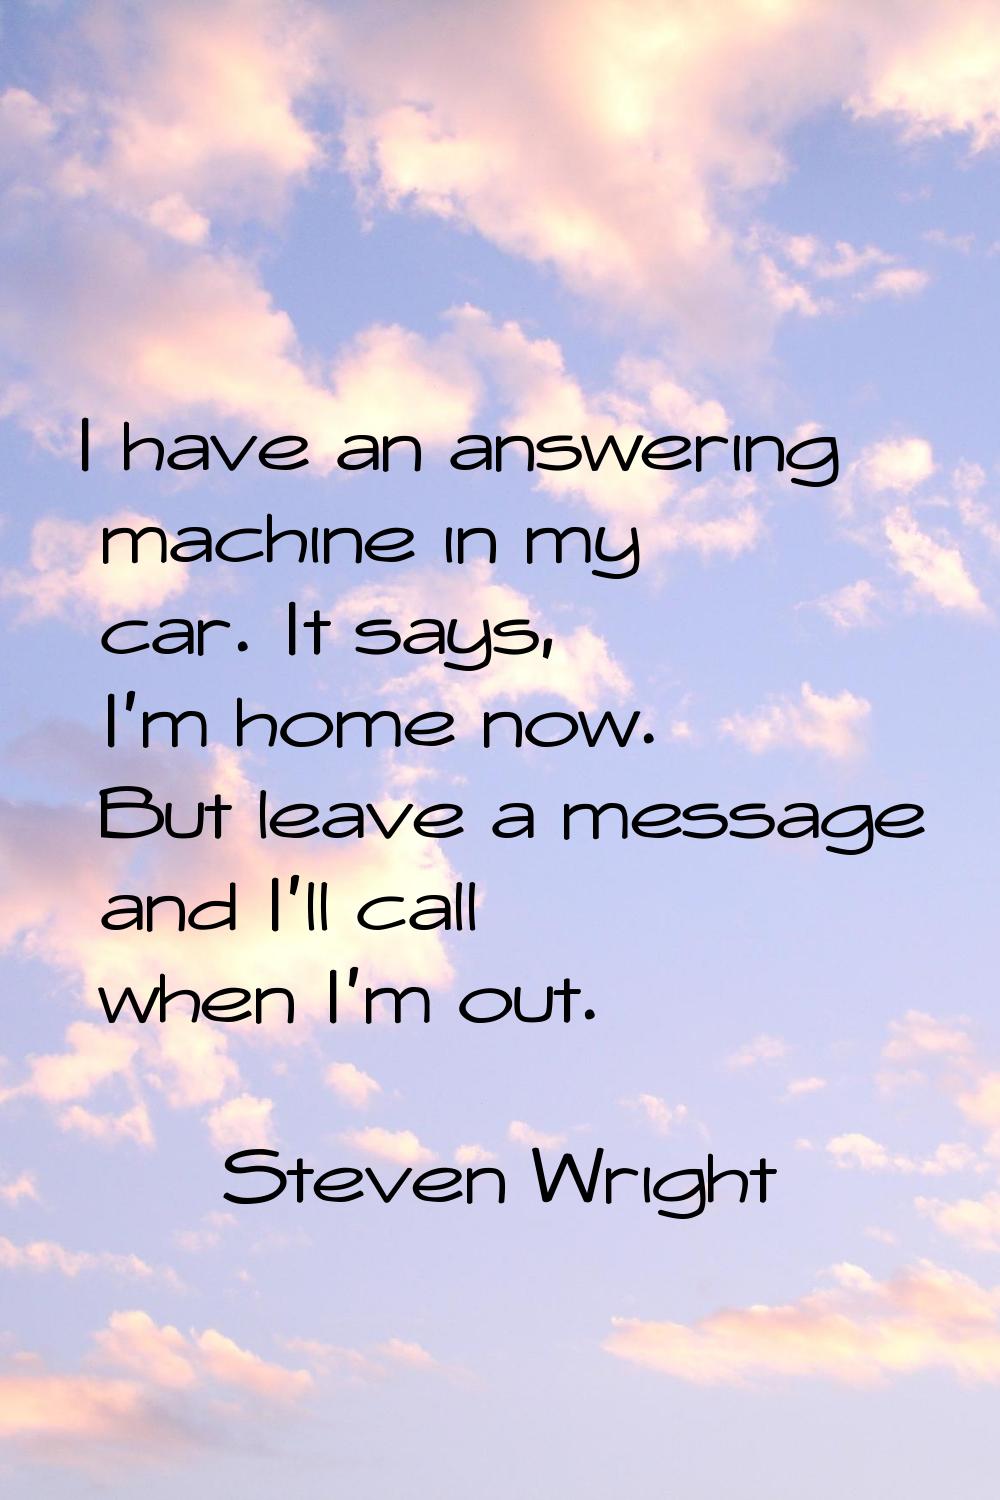 I have an answering machine in my car. It says, I'm home now. But leave a message and I'll call whe